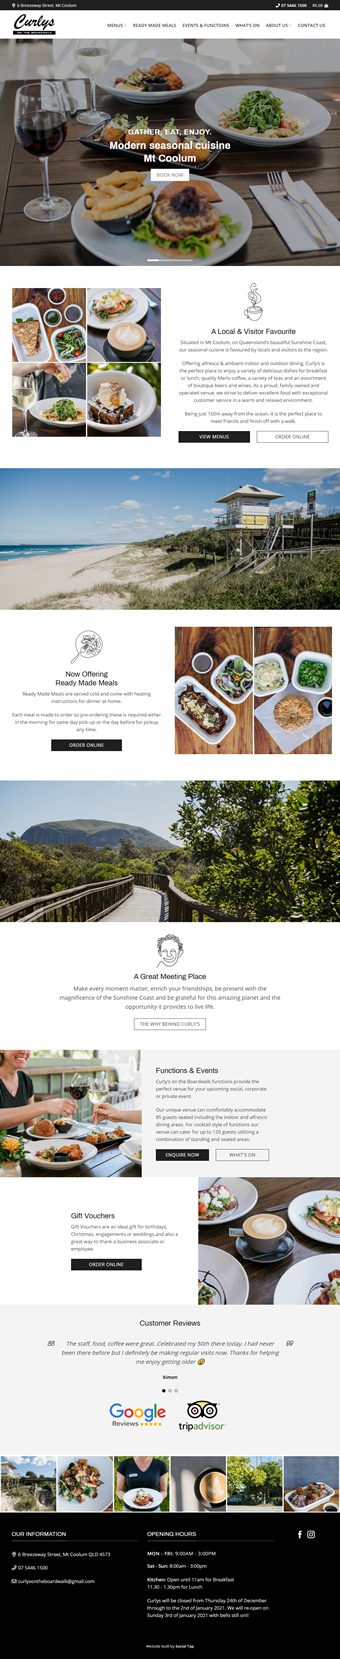 Our Work Hospitality Tourism Website Design Curlys On The Boardwalk